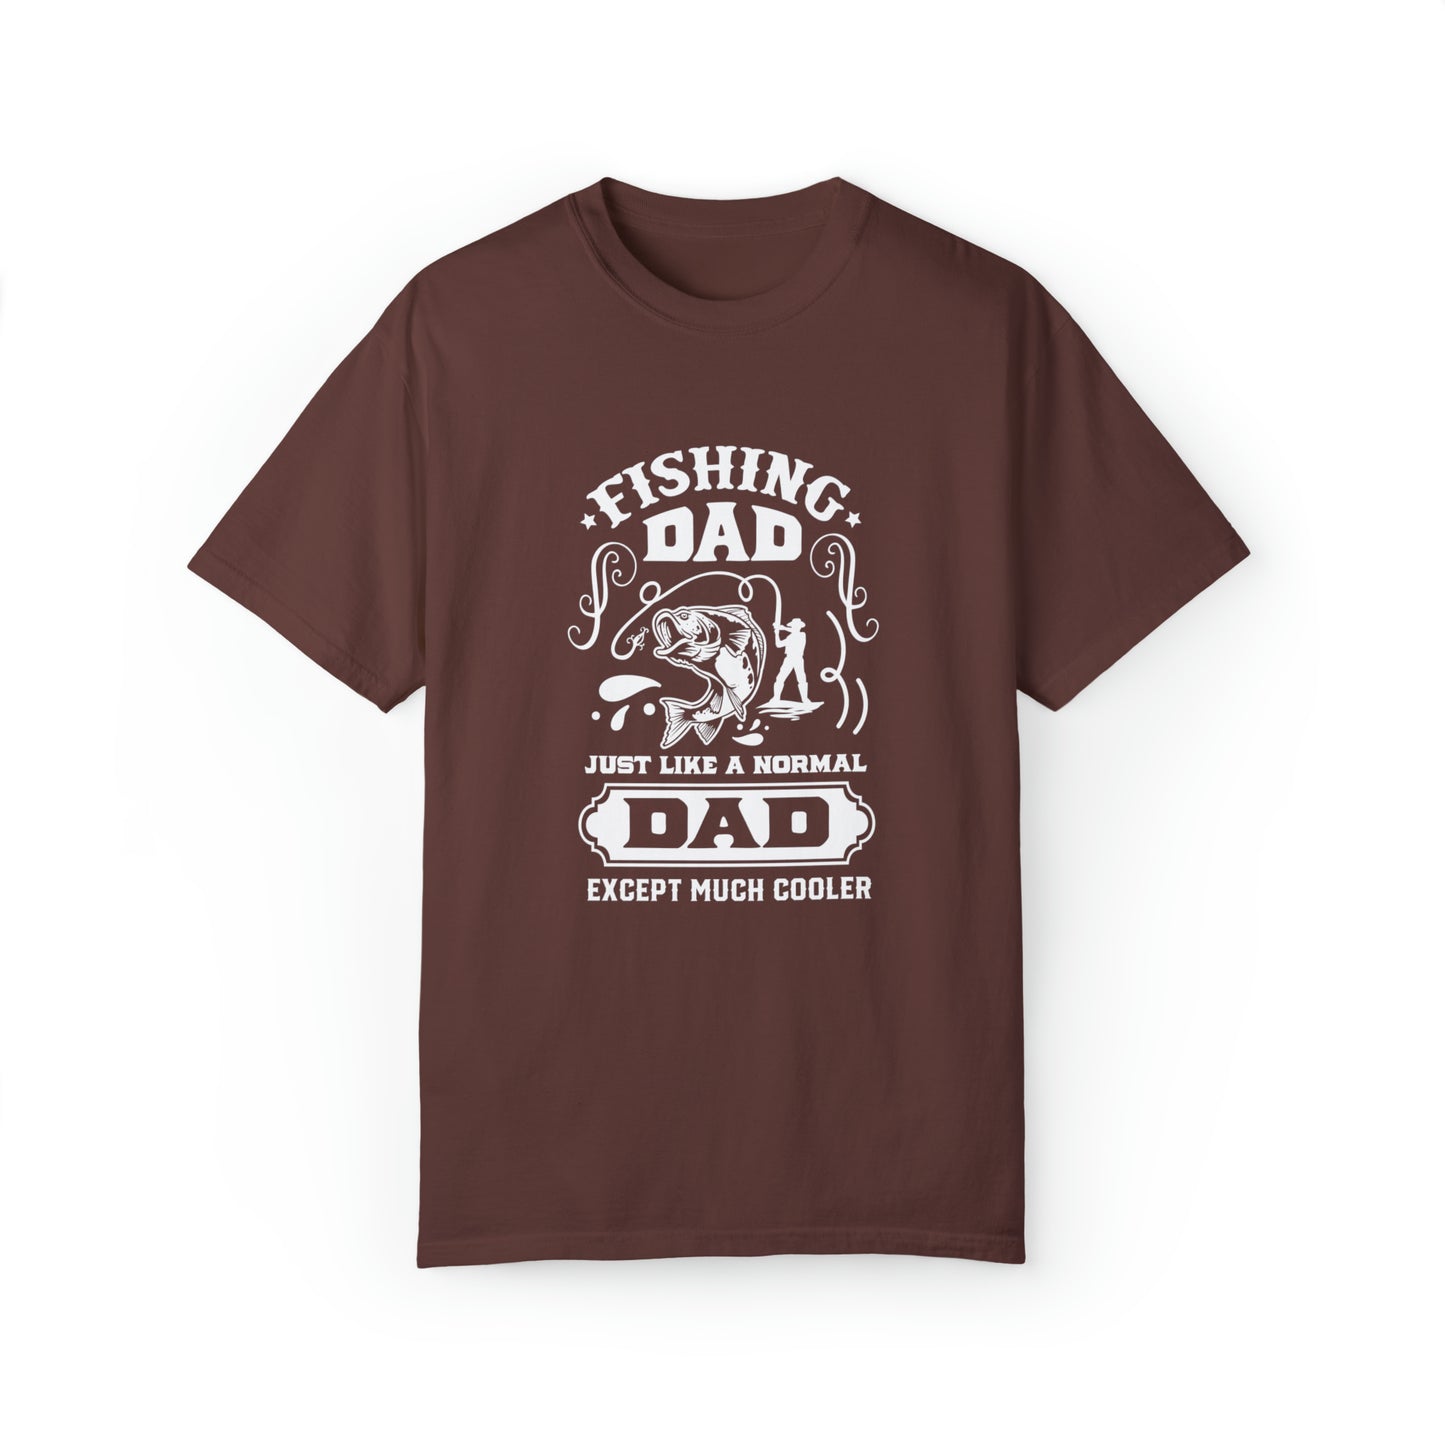 Fishing dad just like a normal dad except much cooler T-shirt